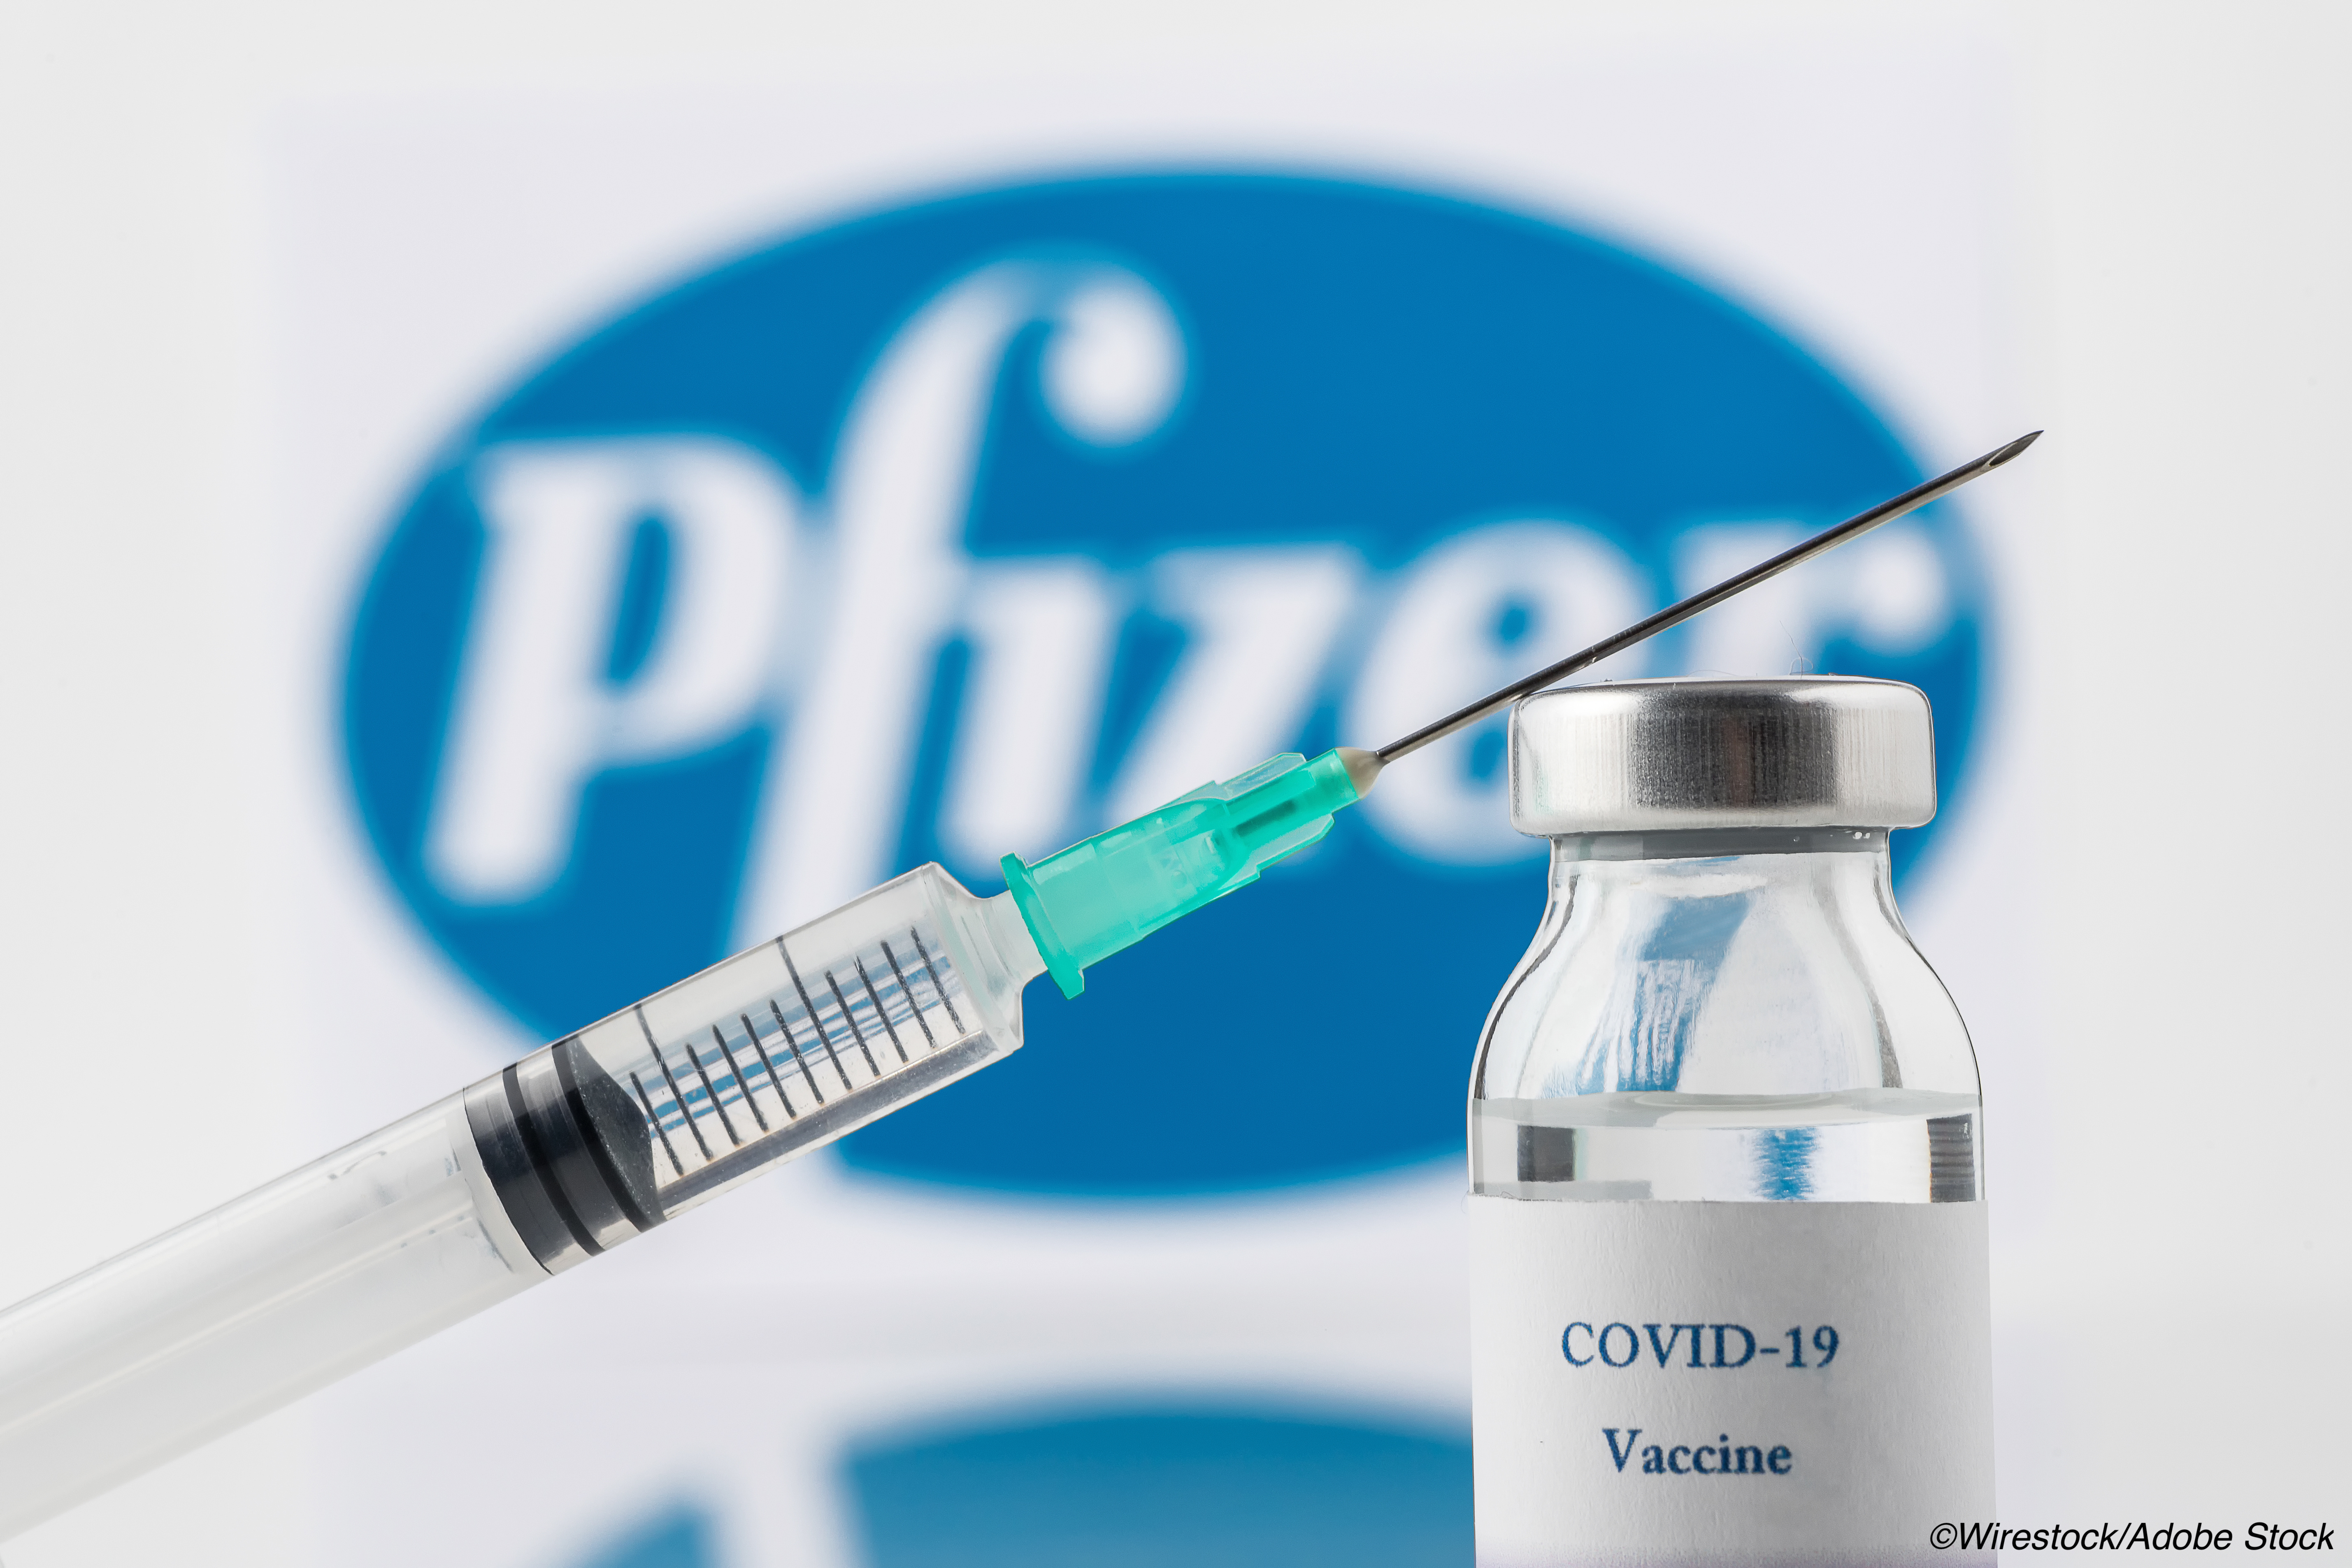 FDA Poised to Authorize Pfizer Covid-19 Vax for Kids Ages 12-15